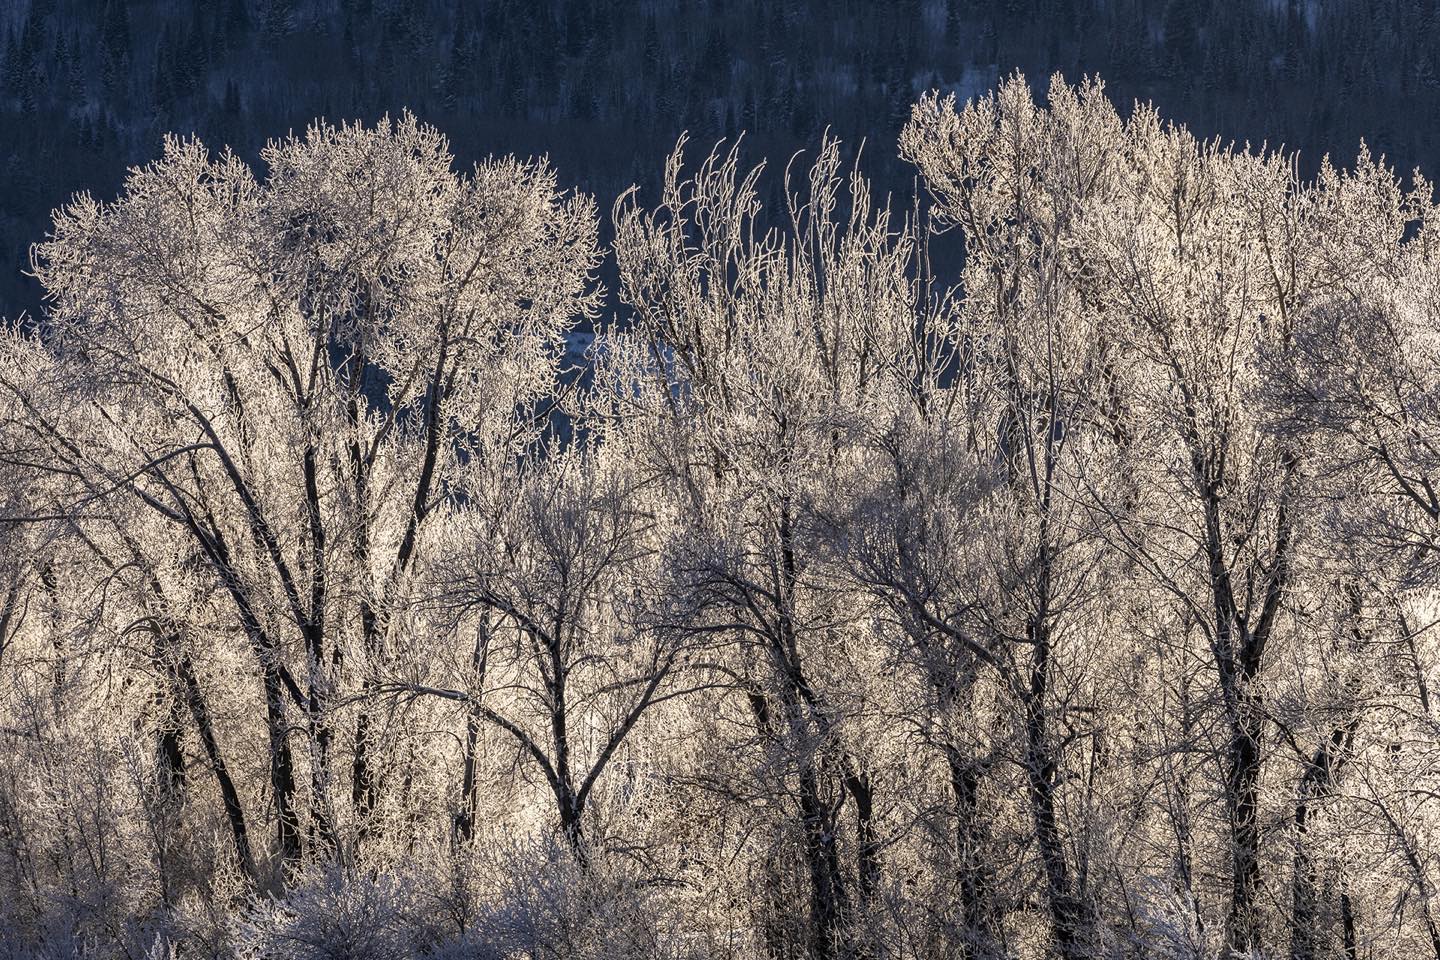 Frosty Trees in Driggs, Idaho this morning. Condensation from a cold overnight fog creates a sparkling screen at the edge of our field, illuminated by the backlit trees. #driggsidaho #backlittrees #bestofthegemstate #orcuttphotography